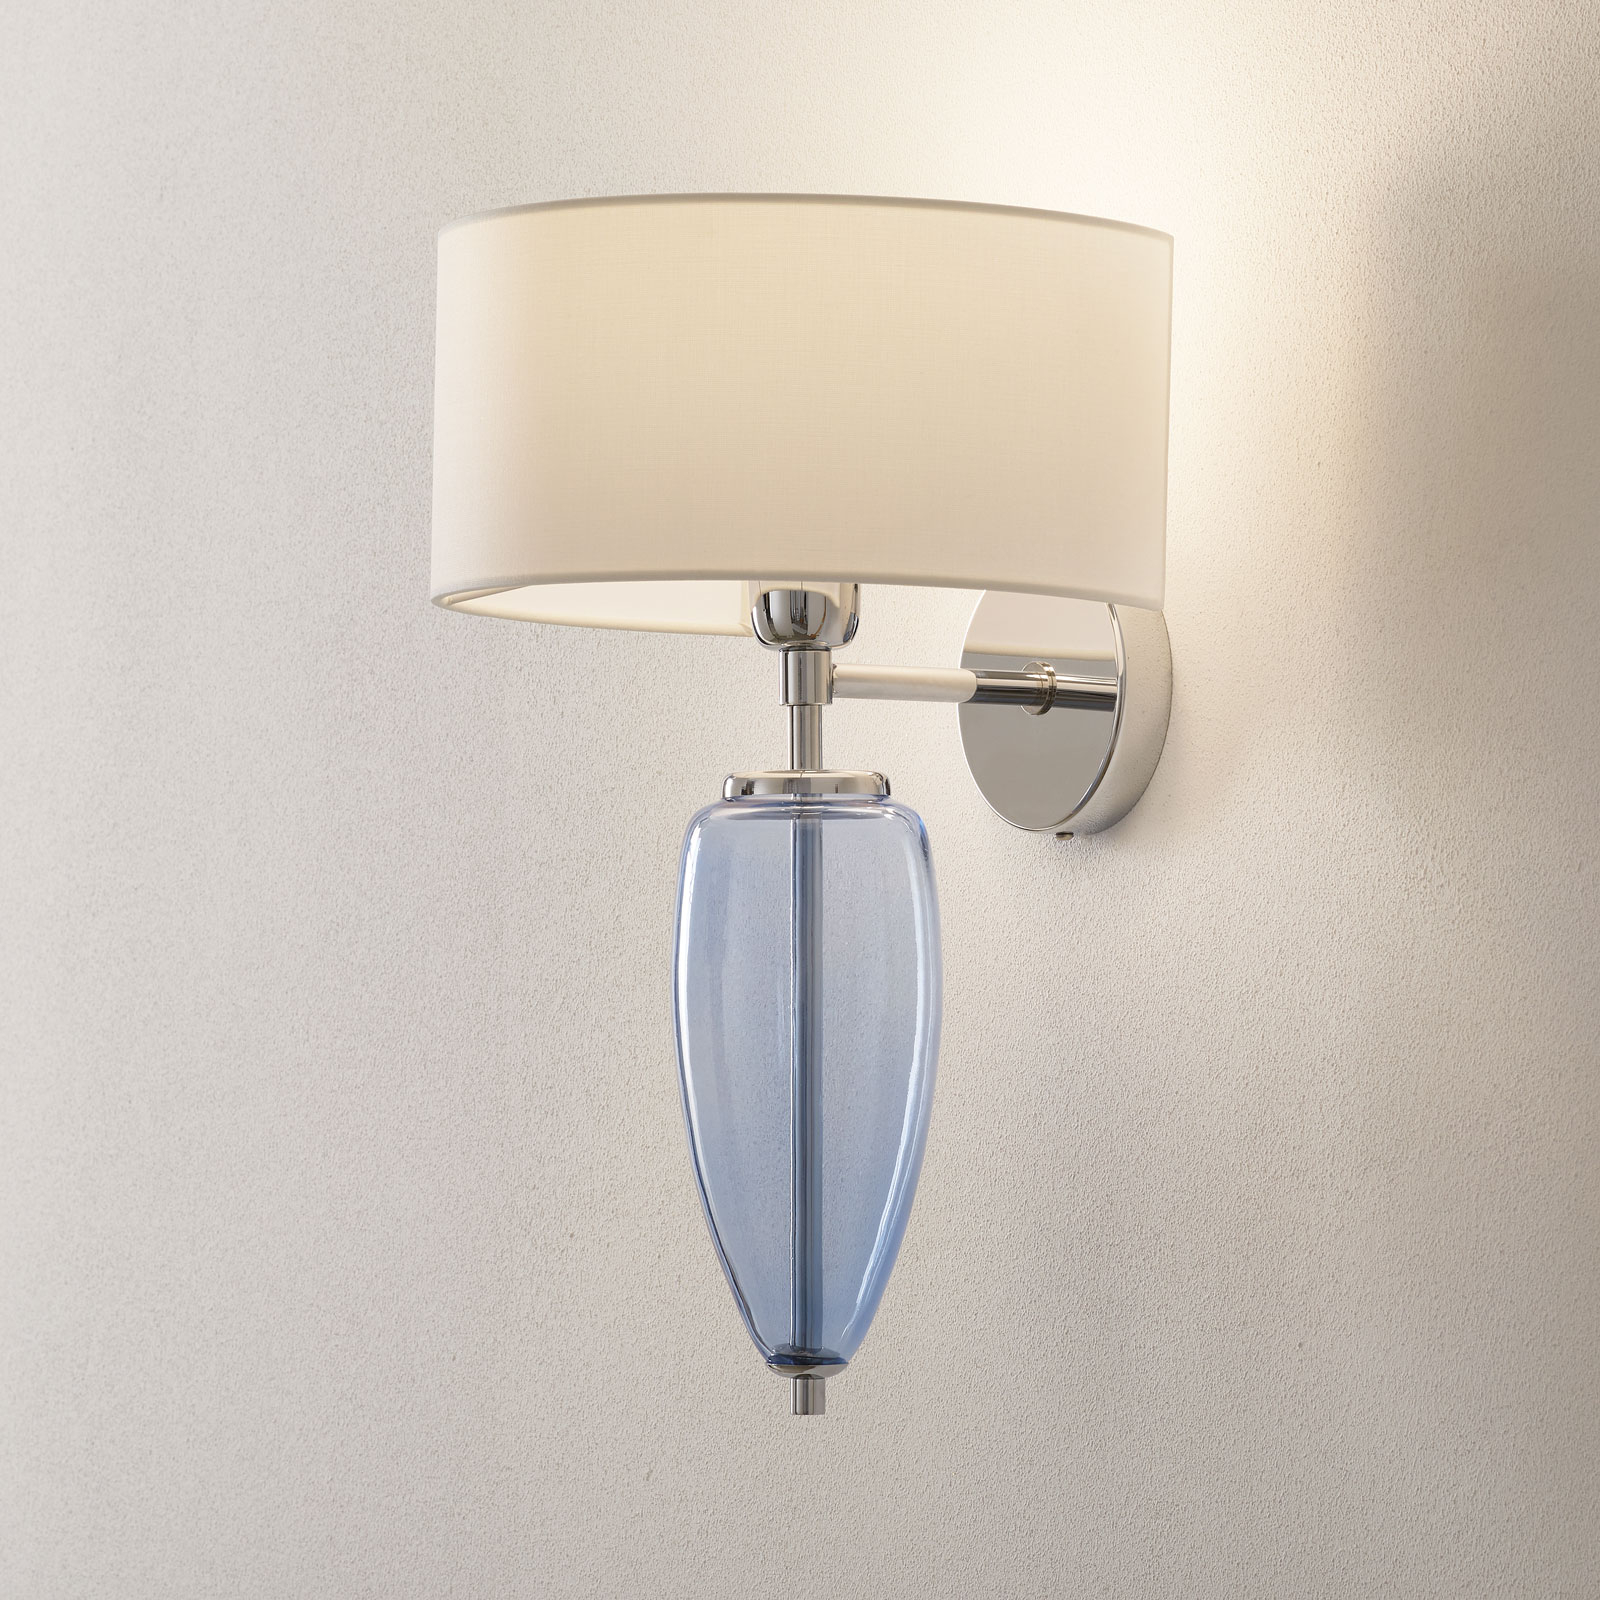 Show Ogiva wall lamp with blue glass element